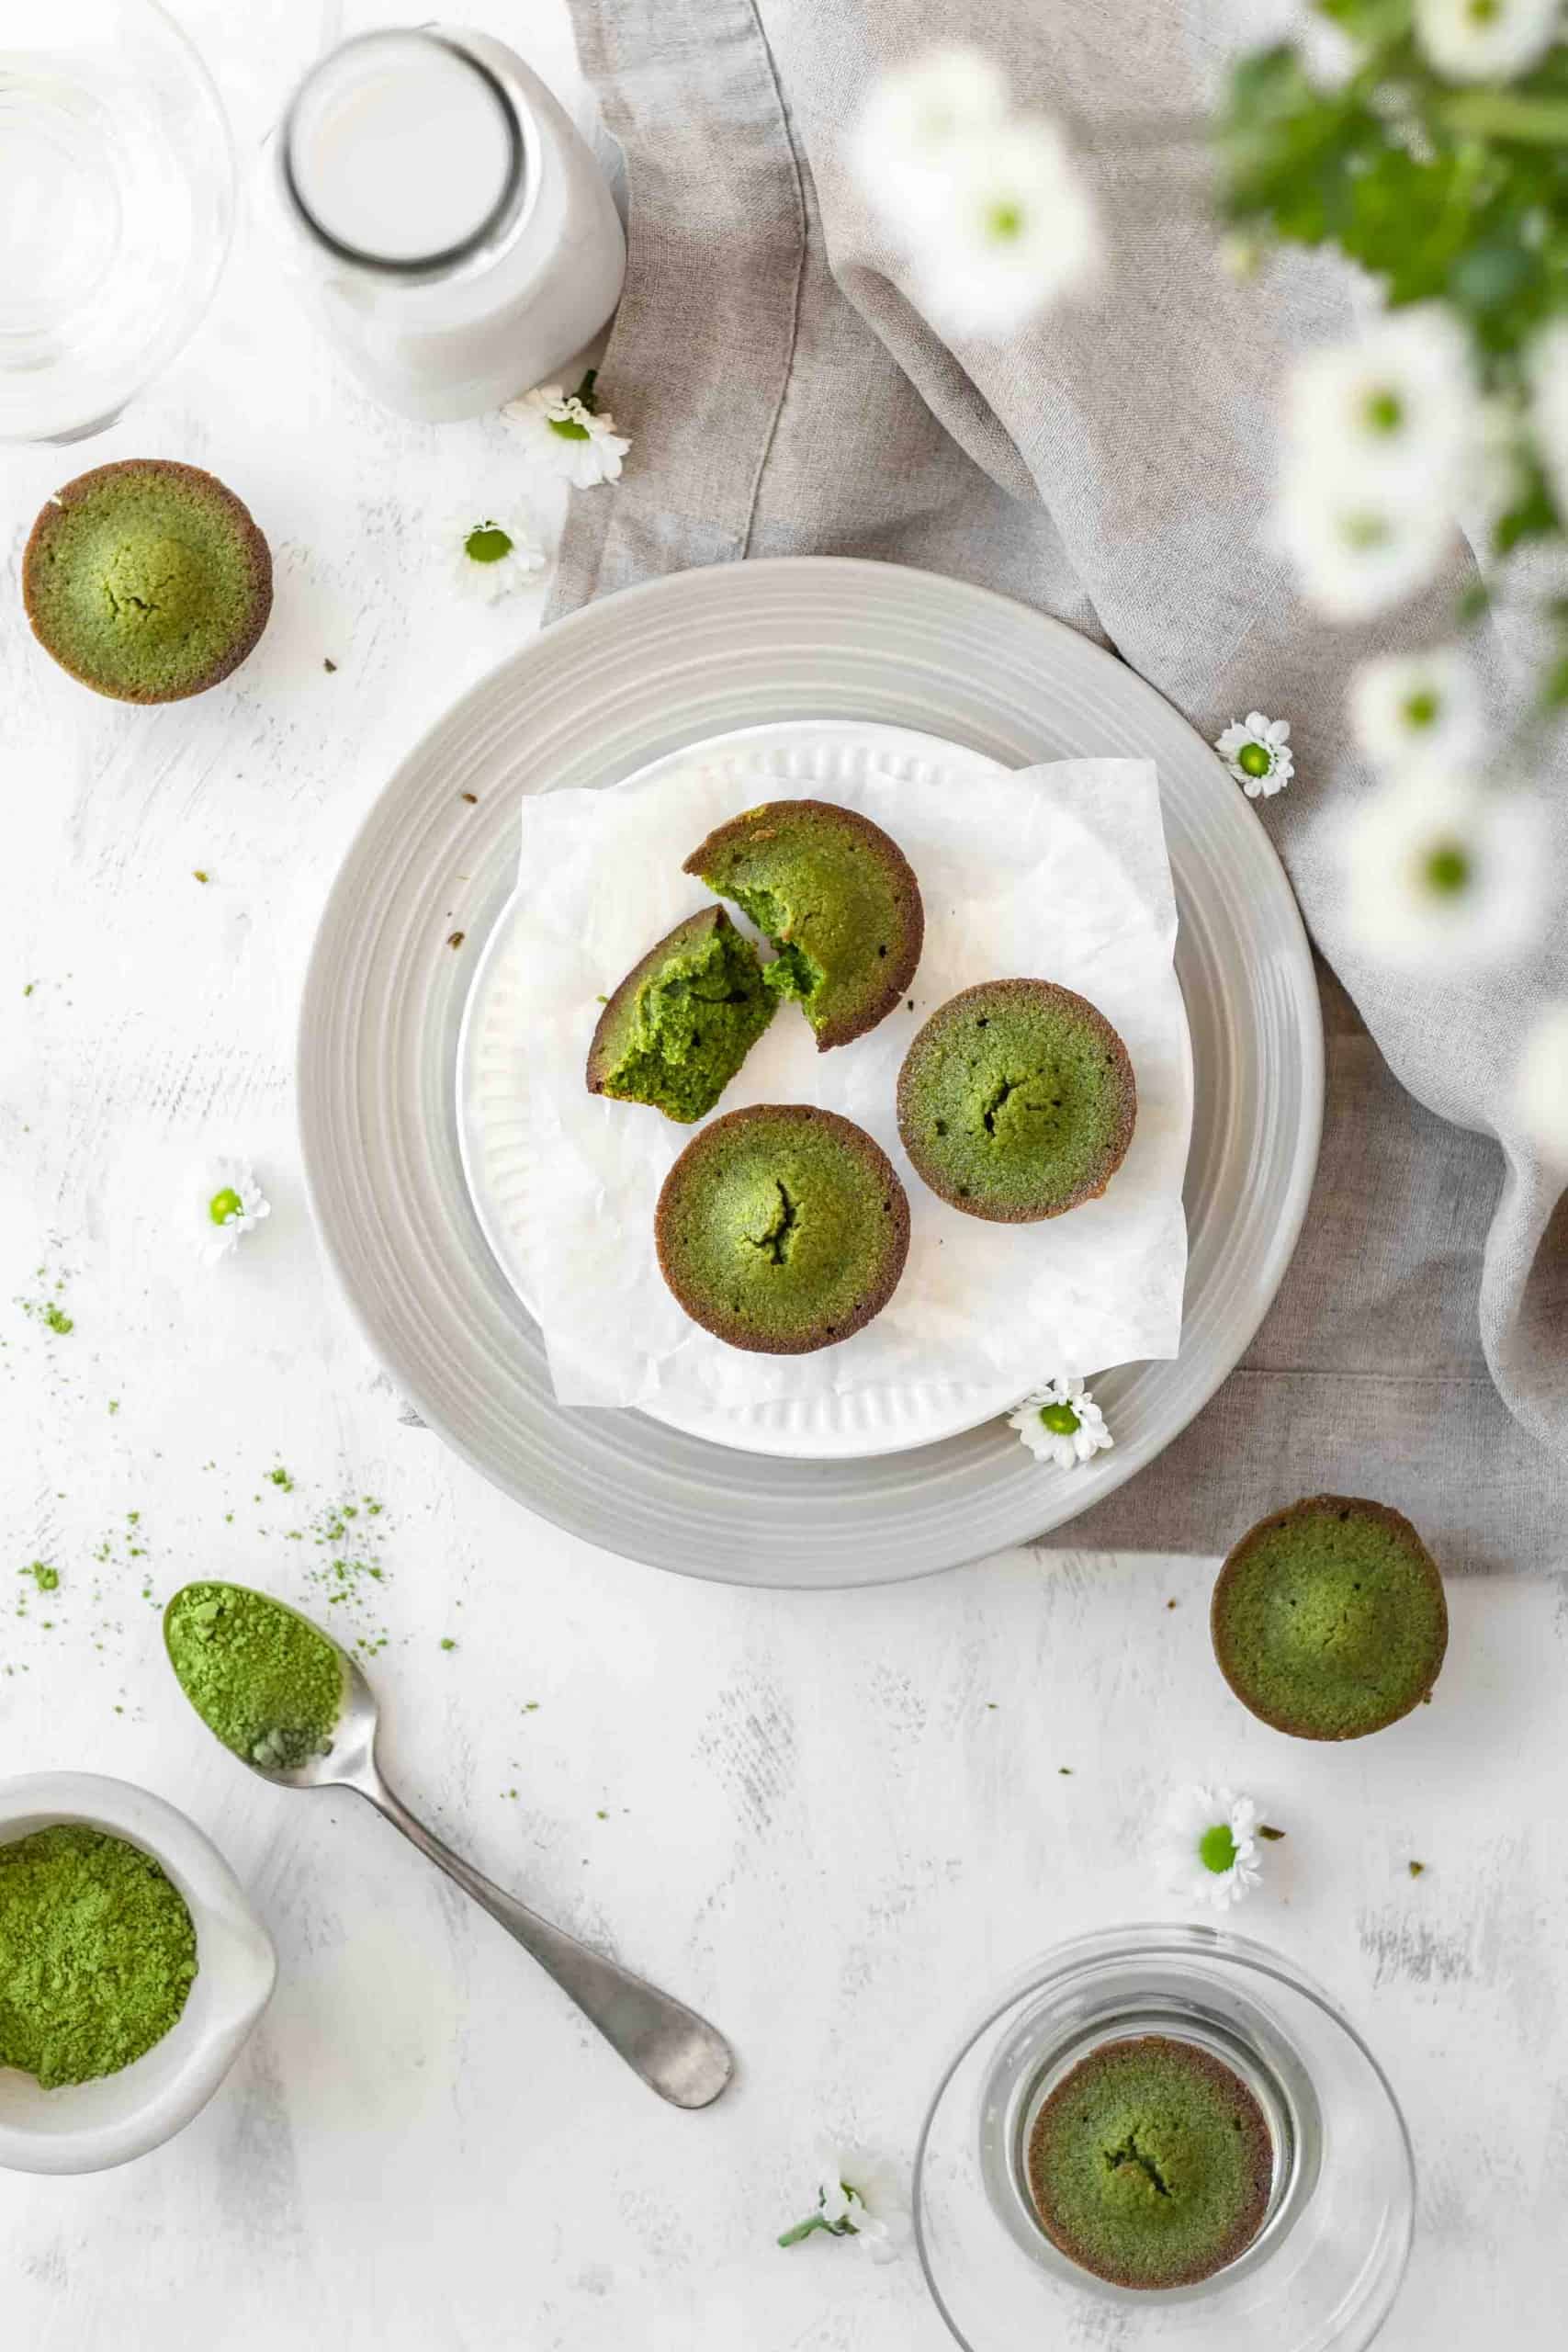 Matcha almond cakes on a plate